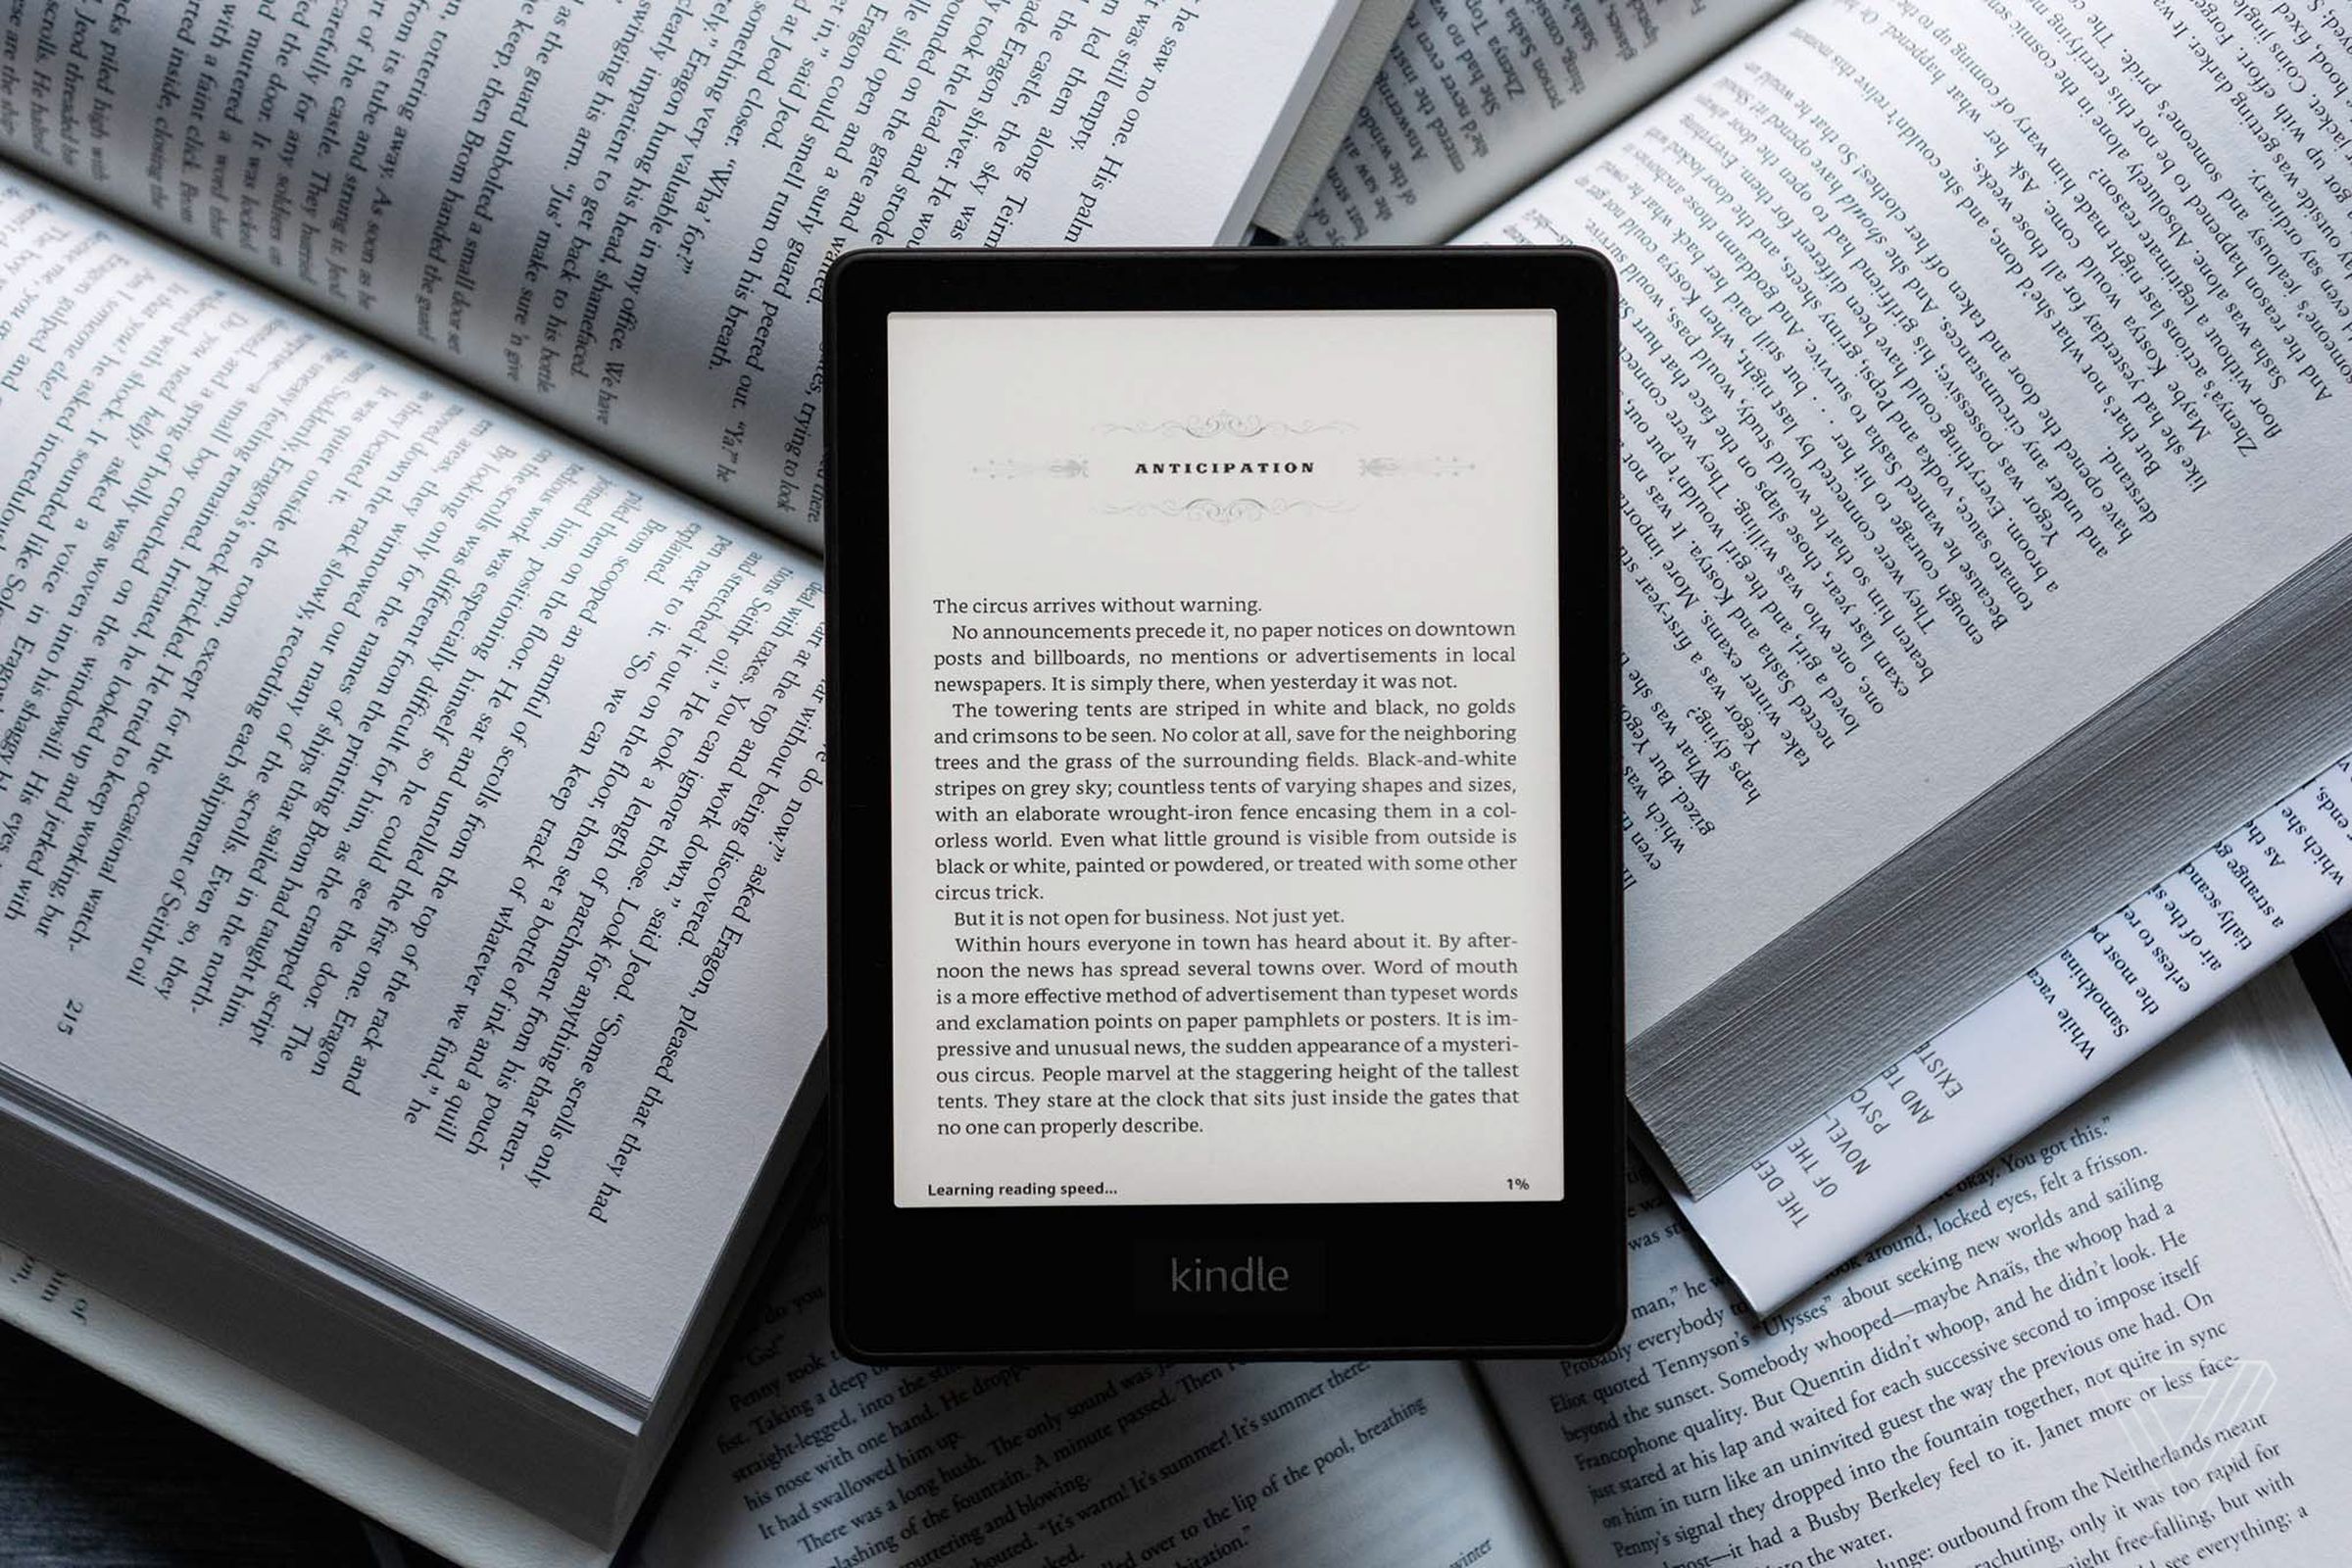 The Kindle Paperwhite against a backdrop of physical books.